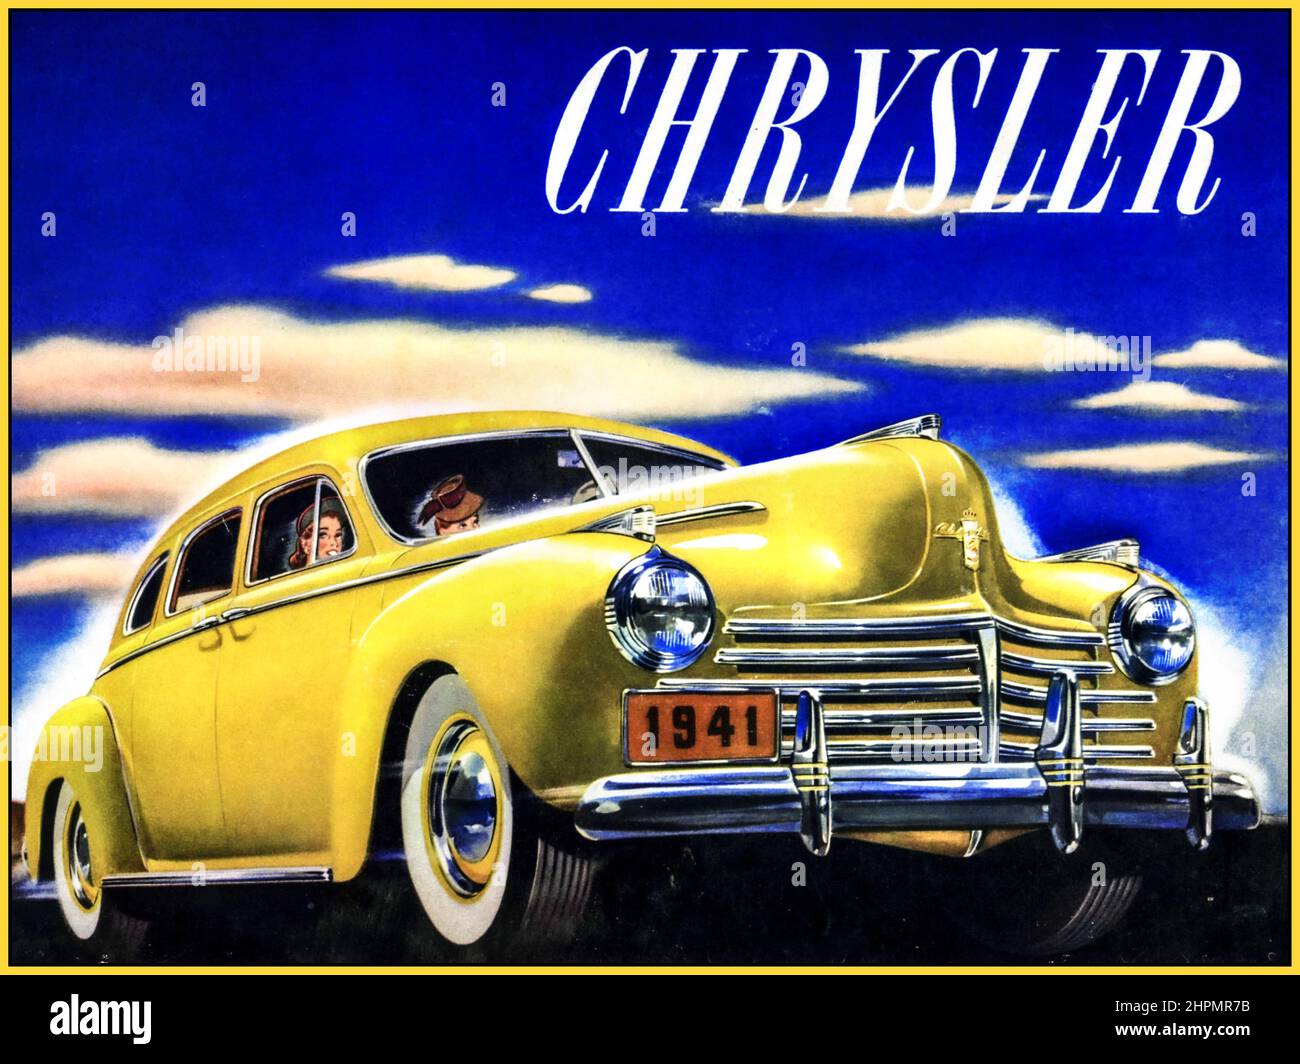 1941 Chrysler Sedan 6 seater American Automobile Brochure Illustration USA The 1941 Imperial Crown Series C-33 remained exclusive and special models were available.3-speed manual transmission with Fluid Drive w/overdrive Vacamatic 3-speed semi-automatic Stock Photo